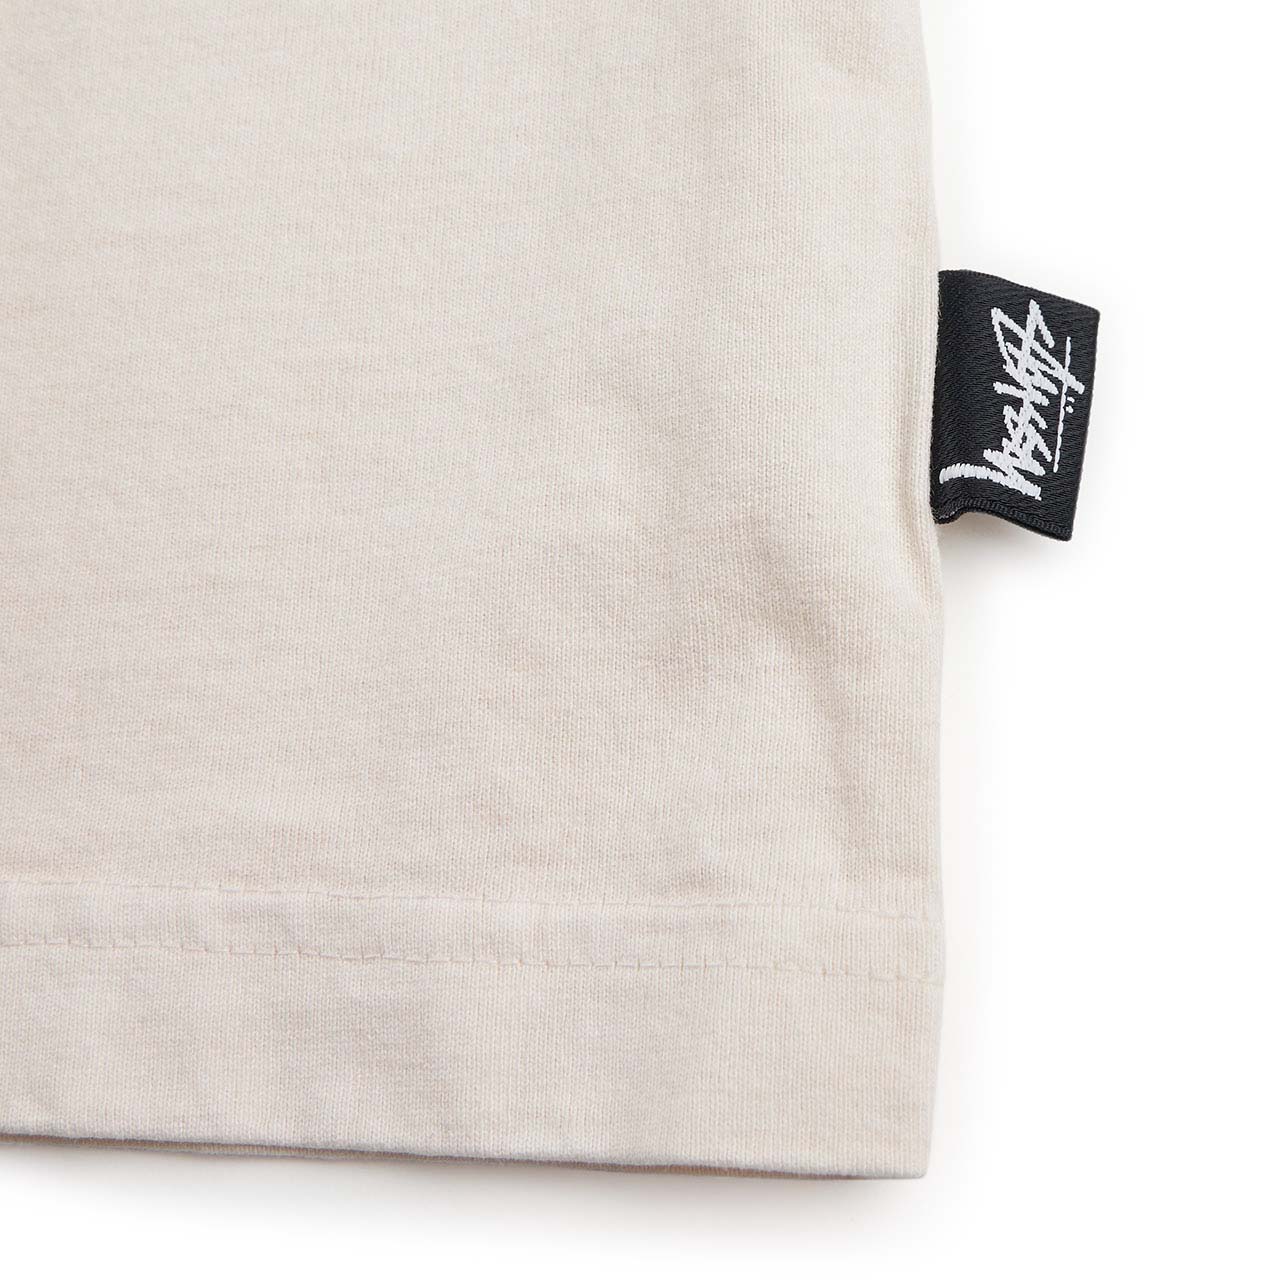 stüssy pigment dyed ls crew (natural)